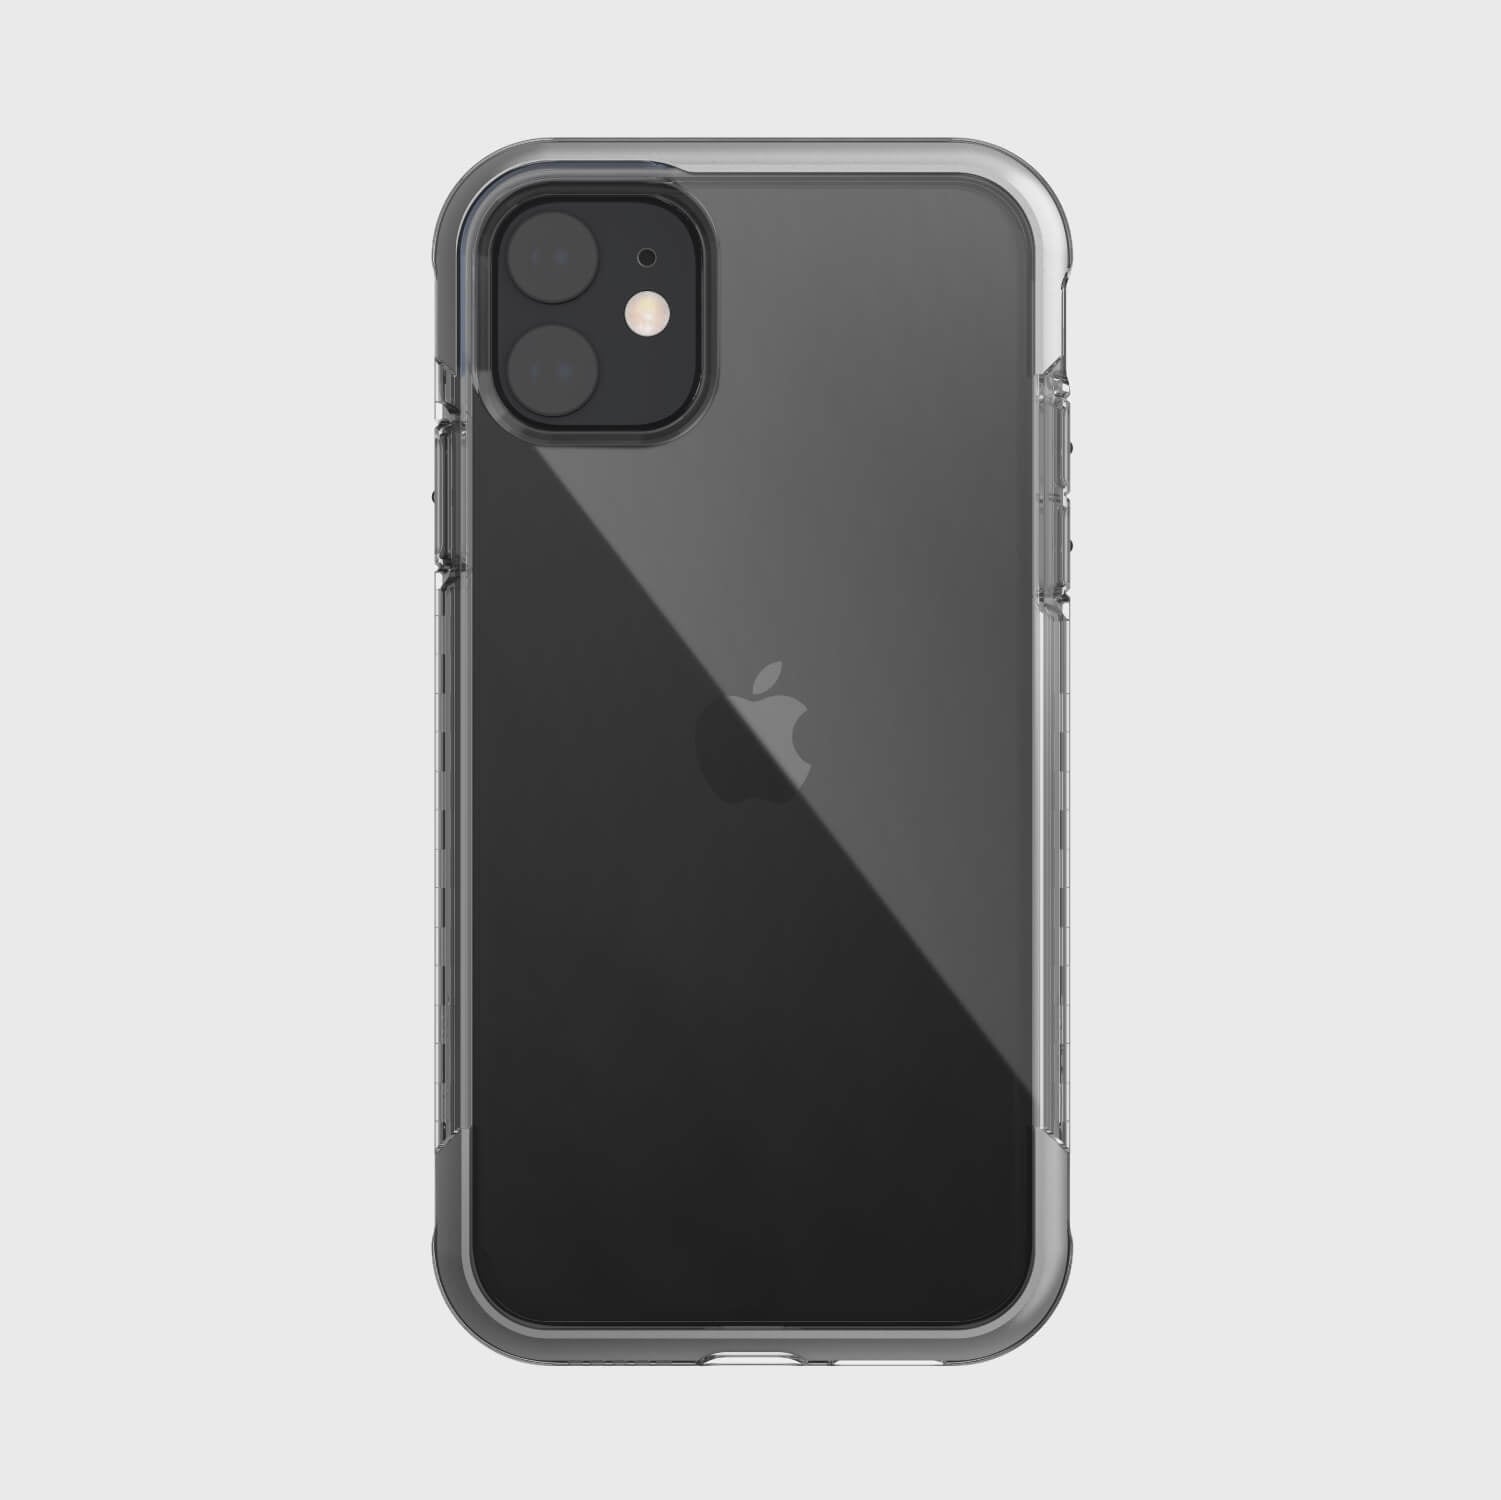 The back view of a Raptic Air iPhone 11 case.